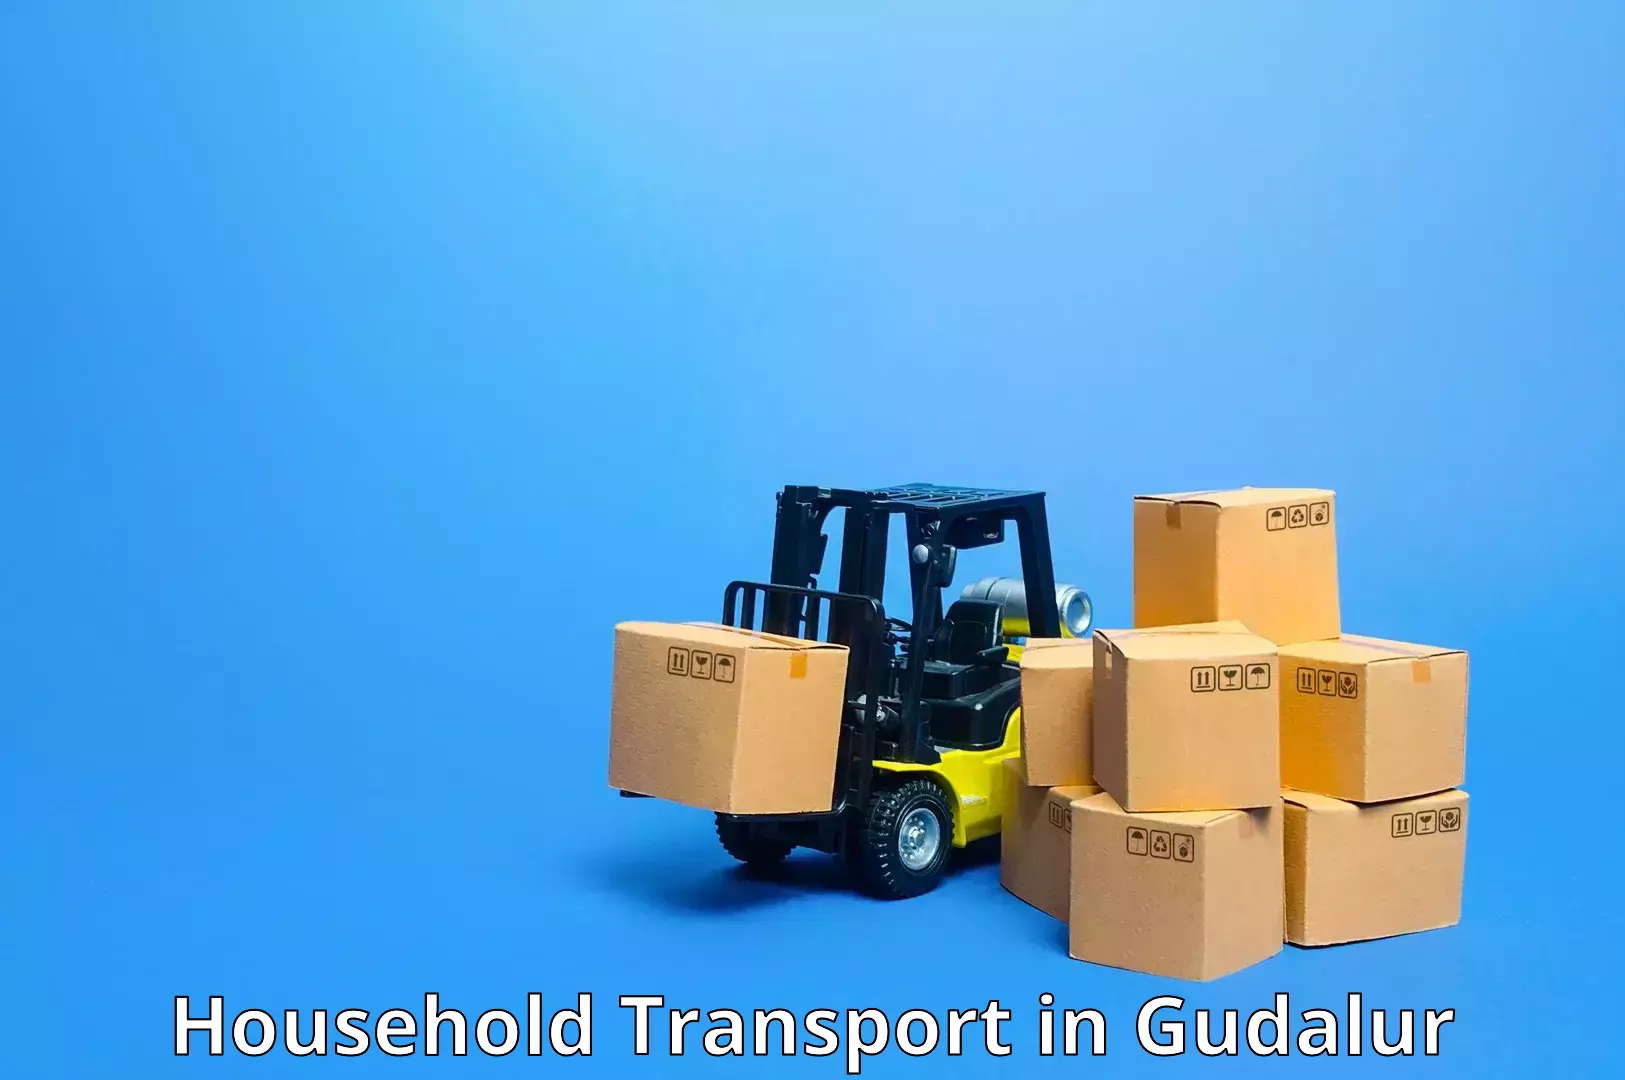 Household transport experts in Gudalur